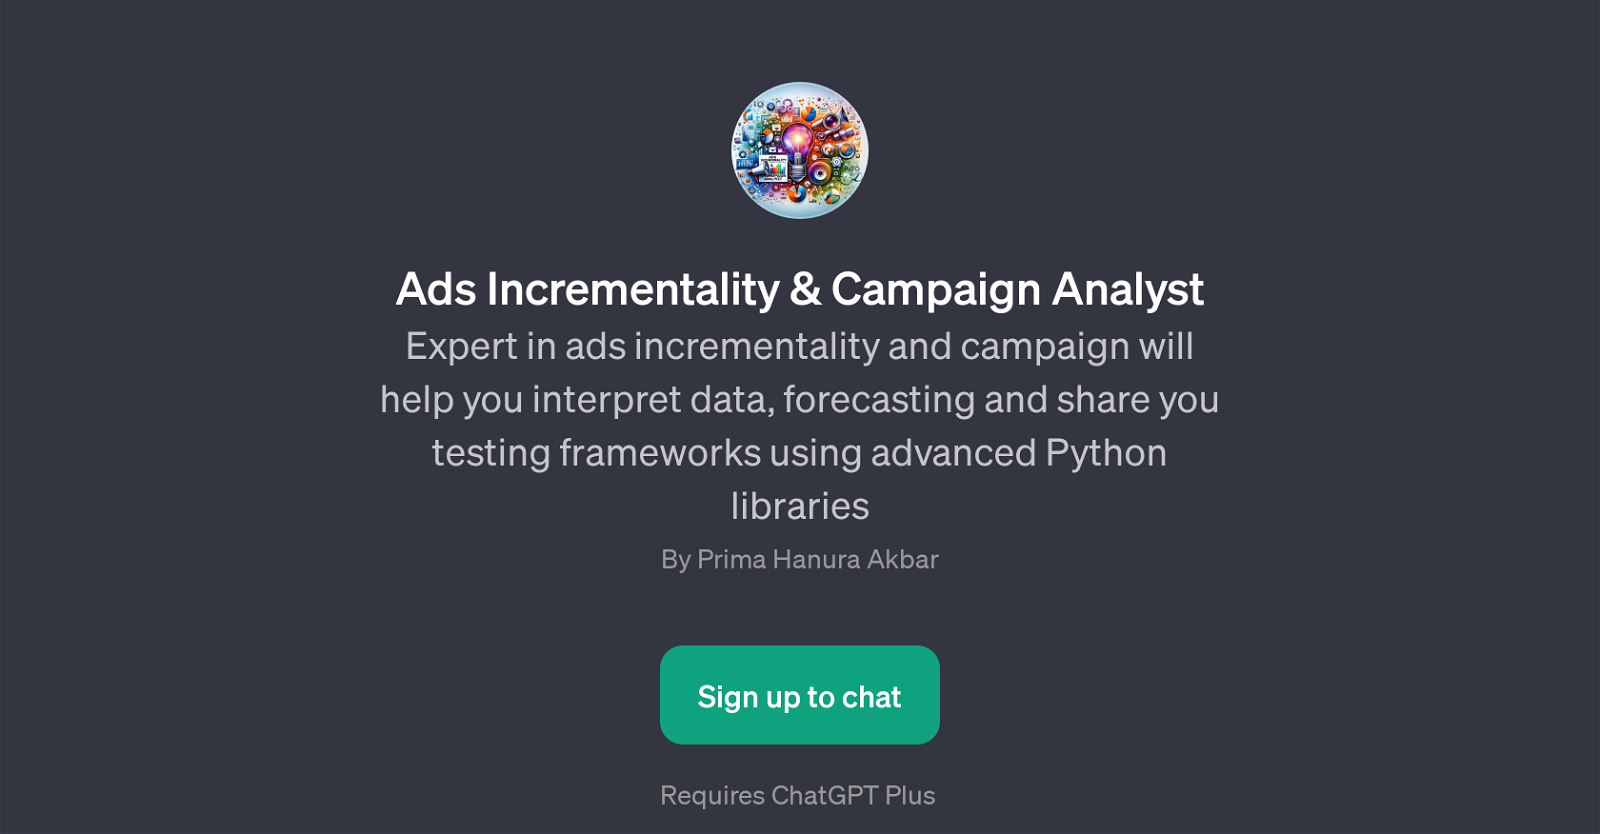 Ads Incrementality & Campaign Analyst website